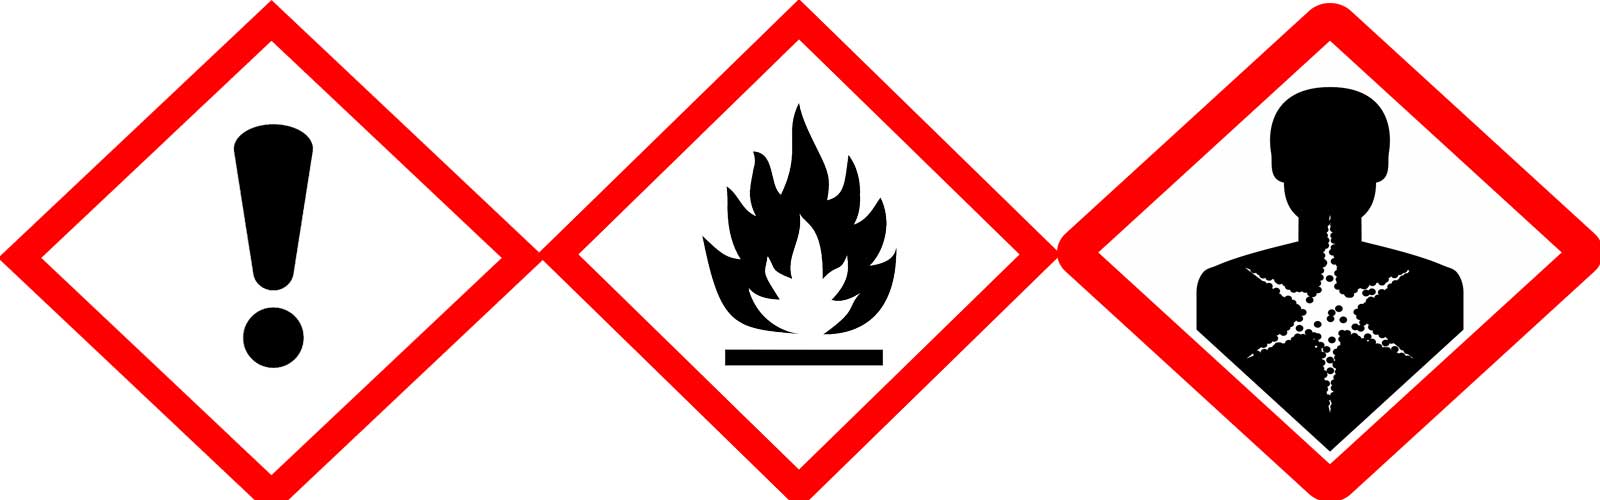 GHS (Globally Harmonized System) for Hazard Classification and Labeling Chemicals